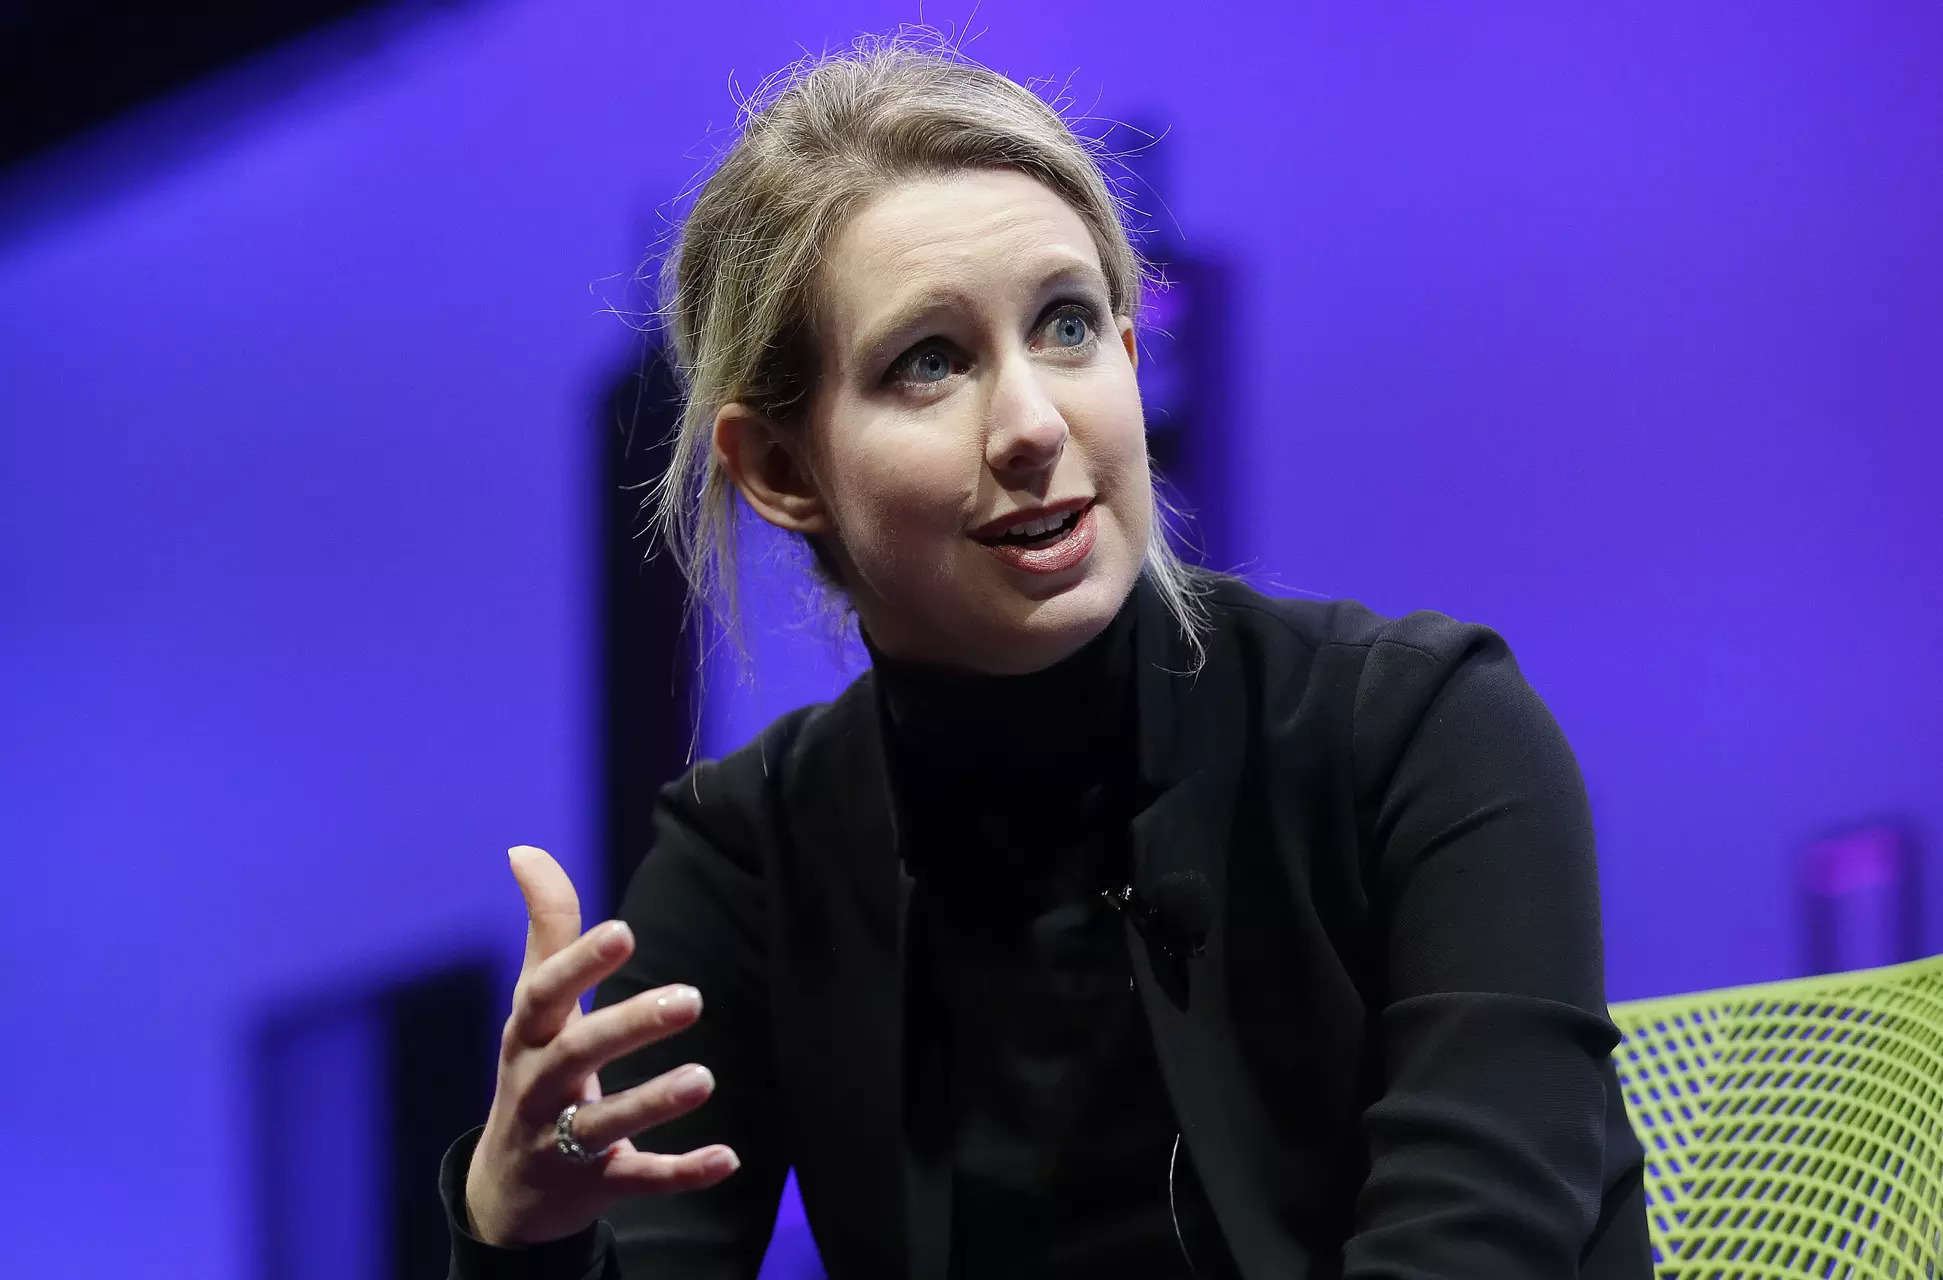 Who is Elizabeth Holmes? Theranos founder begins 11-year prison sentence today. Details here